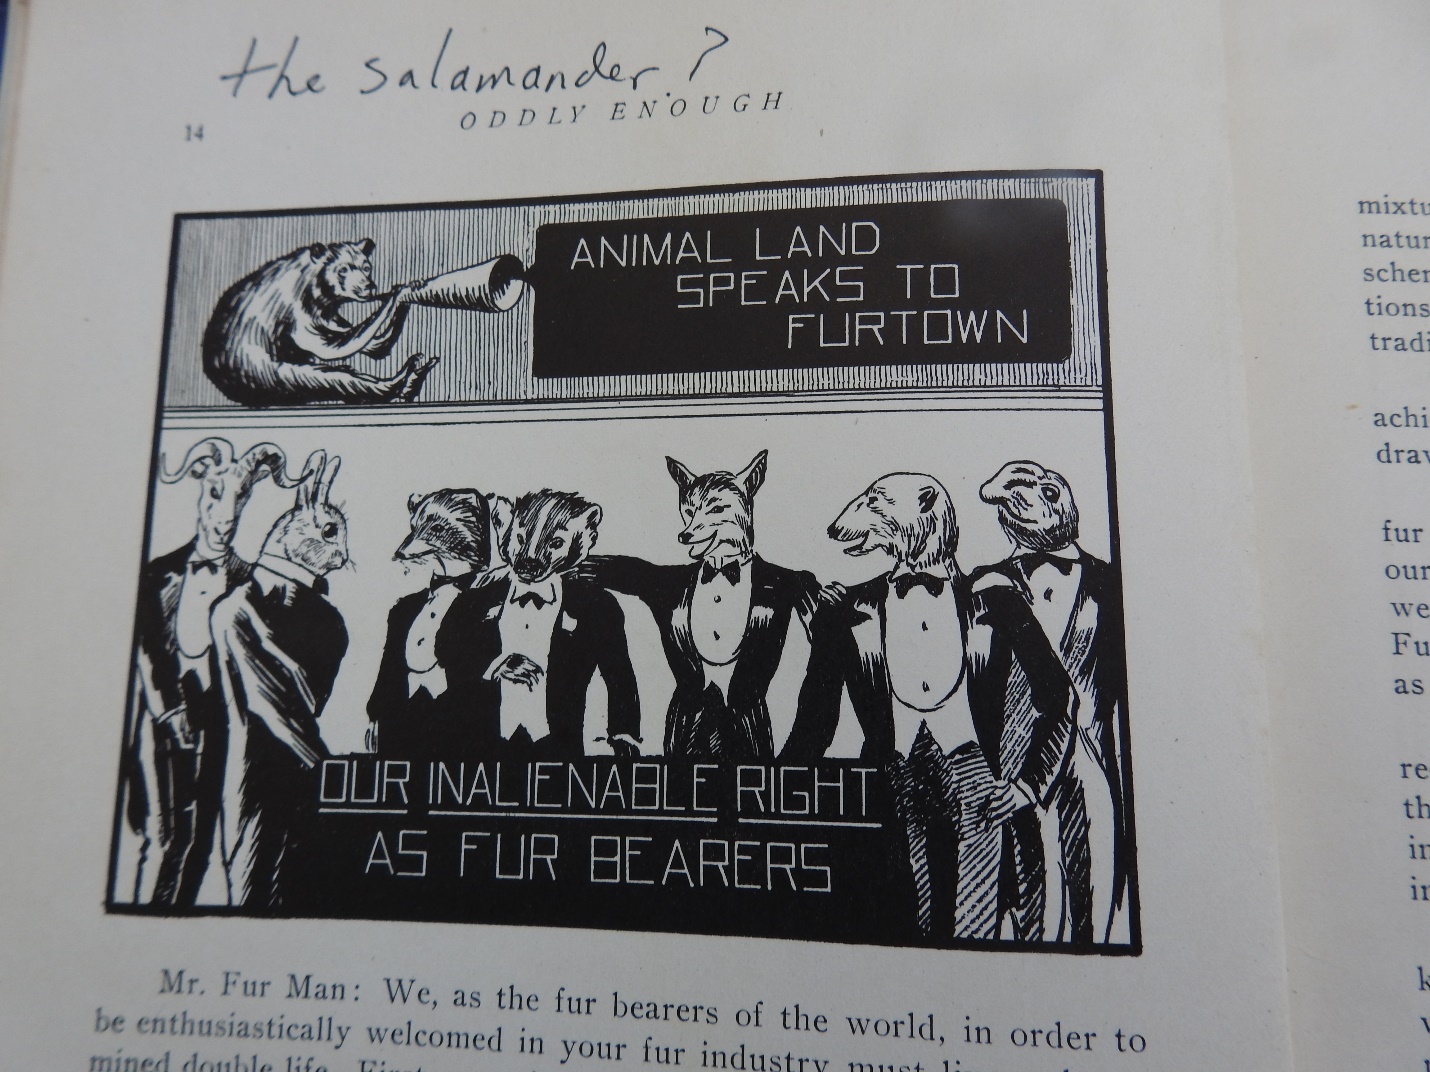 Photograph of a page from the book 'Oddly Enough' with a cartoon depicting men with animal heads wearing tuxedos. The cartoon reads, 'Animal Land speaks to Furtown. Our inalienable right as fur bearers.' A handwritten note near the header wonders, 'the salamander?'